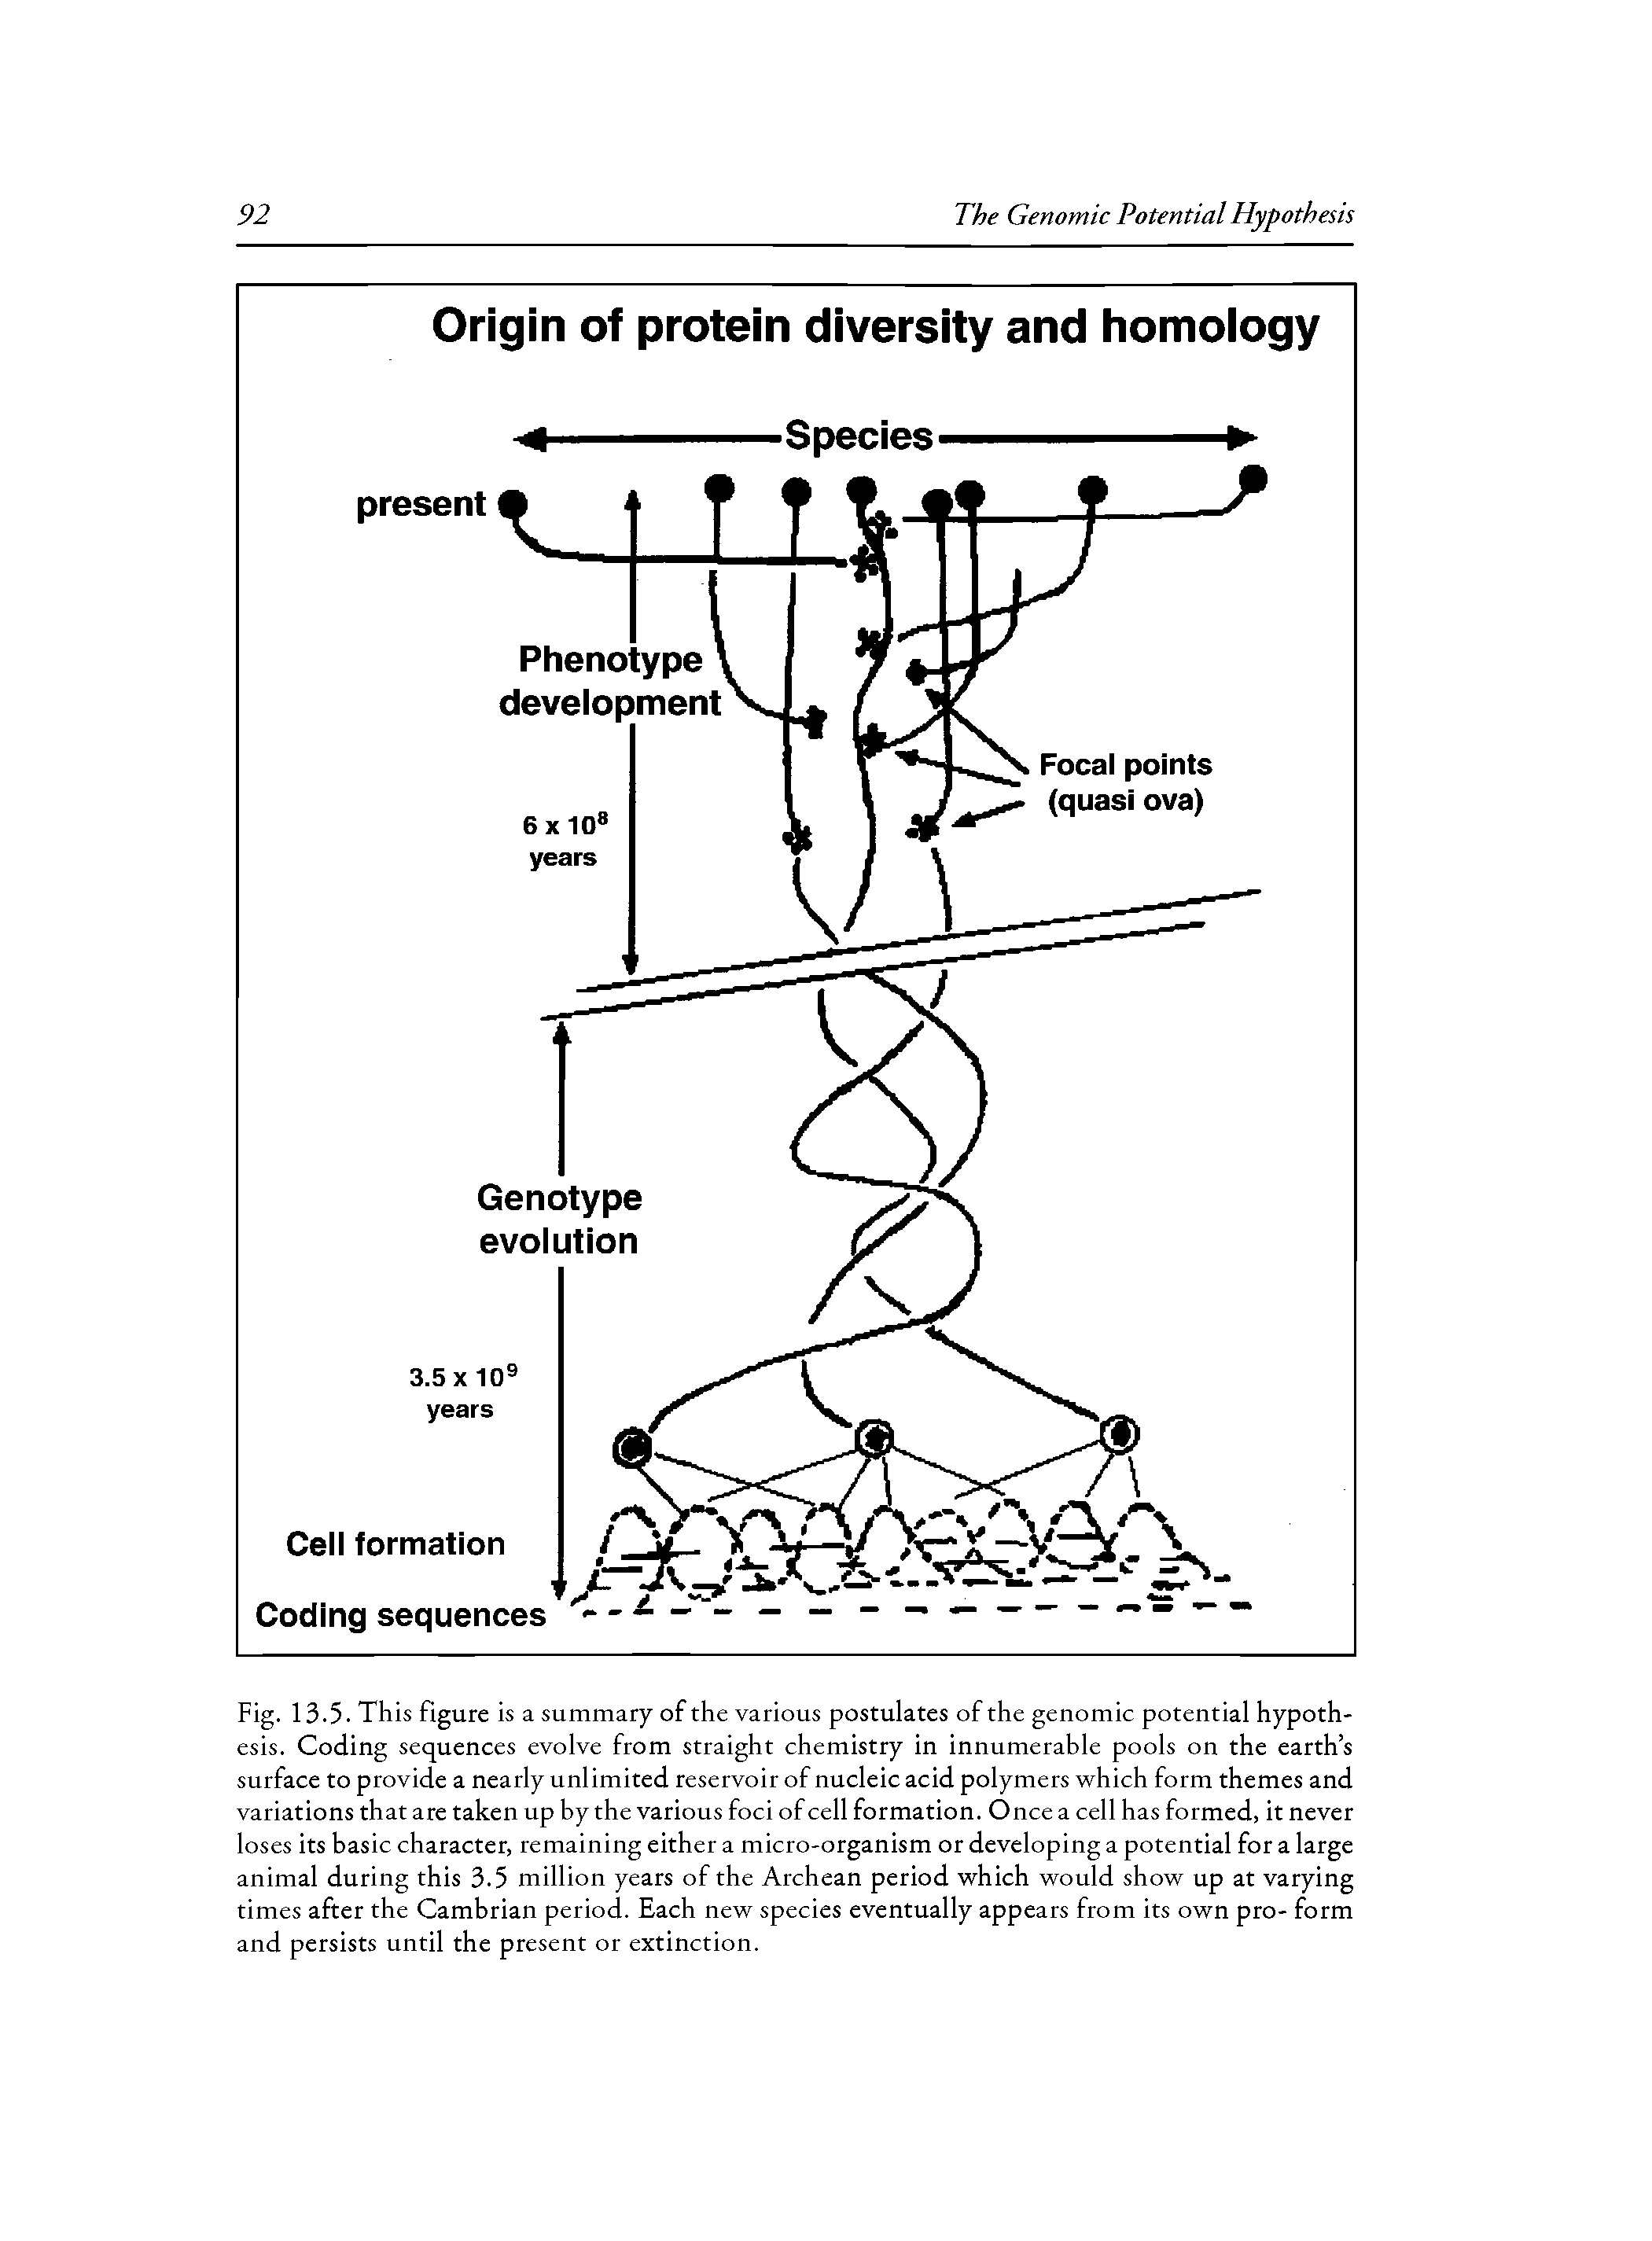 Fig. 13.5. This figure is a summary of the various postulates of the genomic potential hypothesis. Coding sequences evolve from straight chemistry in innumerable pools on the earth s surface to provide a nearly unlimited reservoir of nucleic acid polymers which form themes and variations that are taken up by the various foci of cell formation. Once a cell has formed, it never loses its basic character, remaining either a micro-organism or developing a potential for a large animal during this 3.5 million years of the Archean period which would show up at varying times after the Cambrian period. Each new species eventually appears from its own pro- form and persists until the present or extinction.